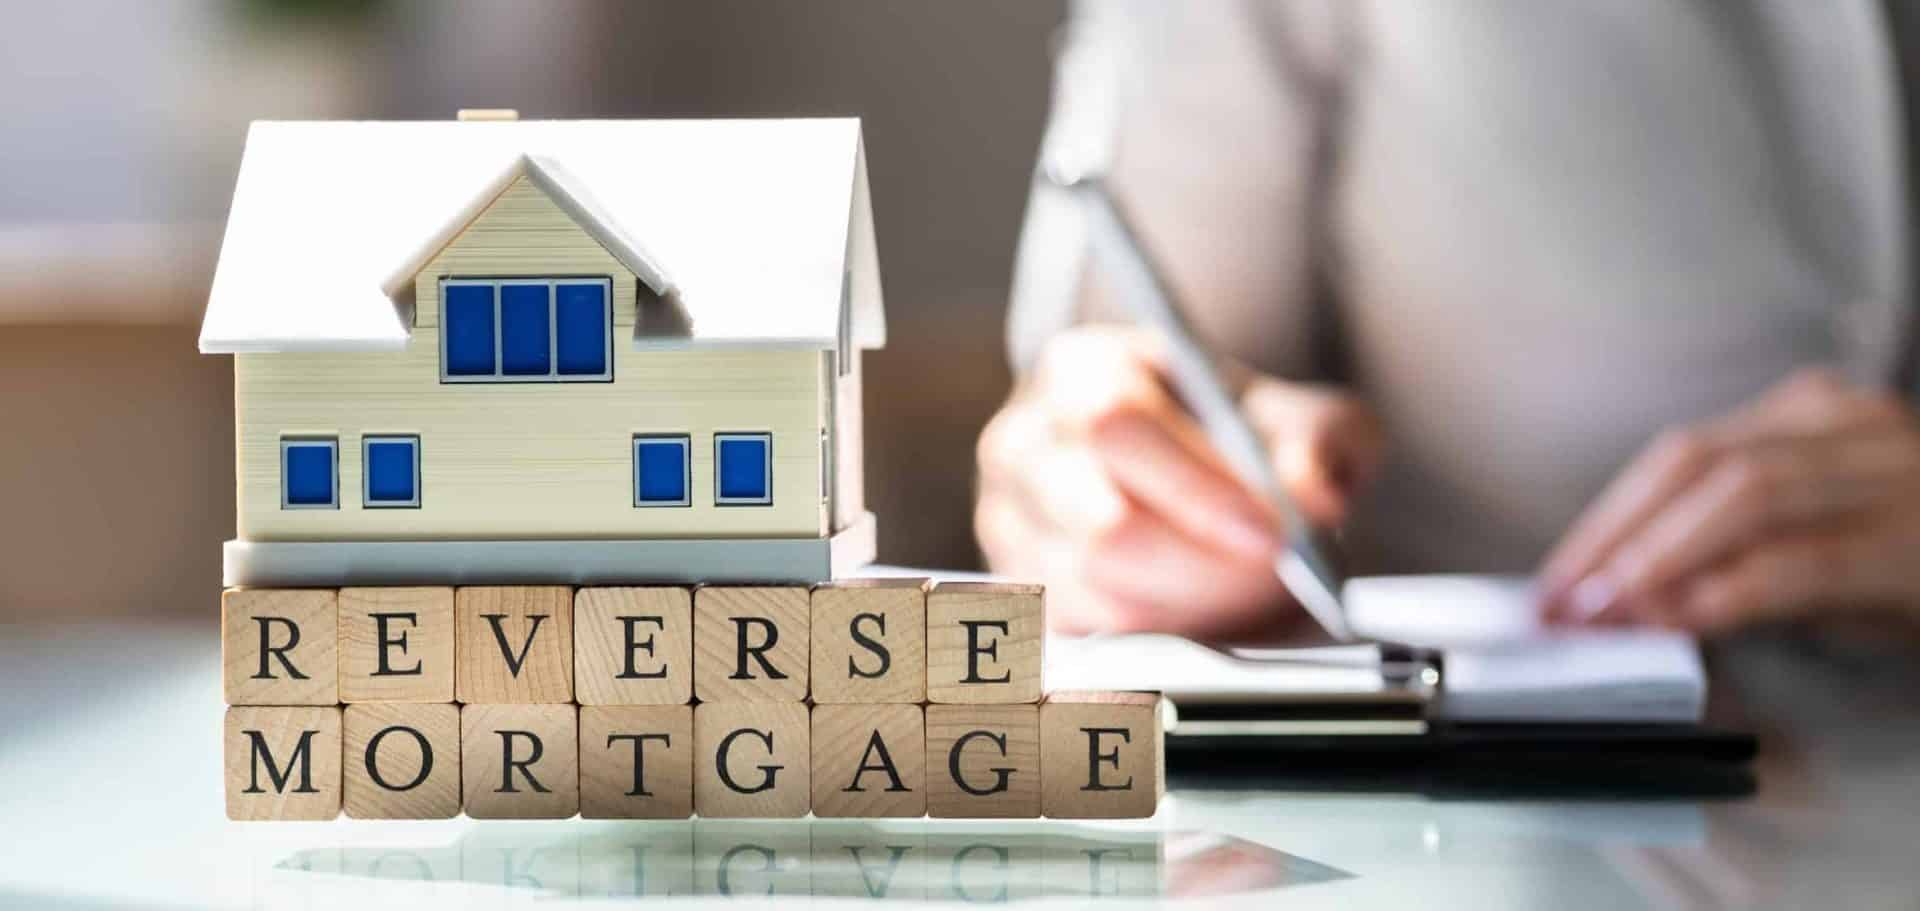 Selling A House With A Reverse Mortgage Explained